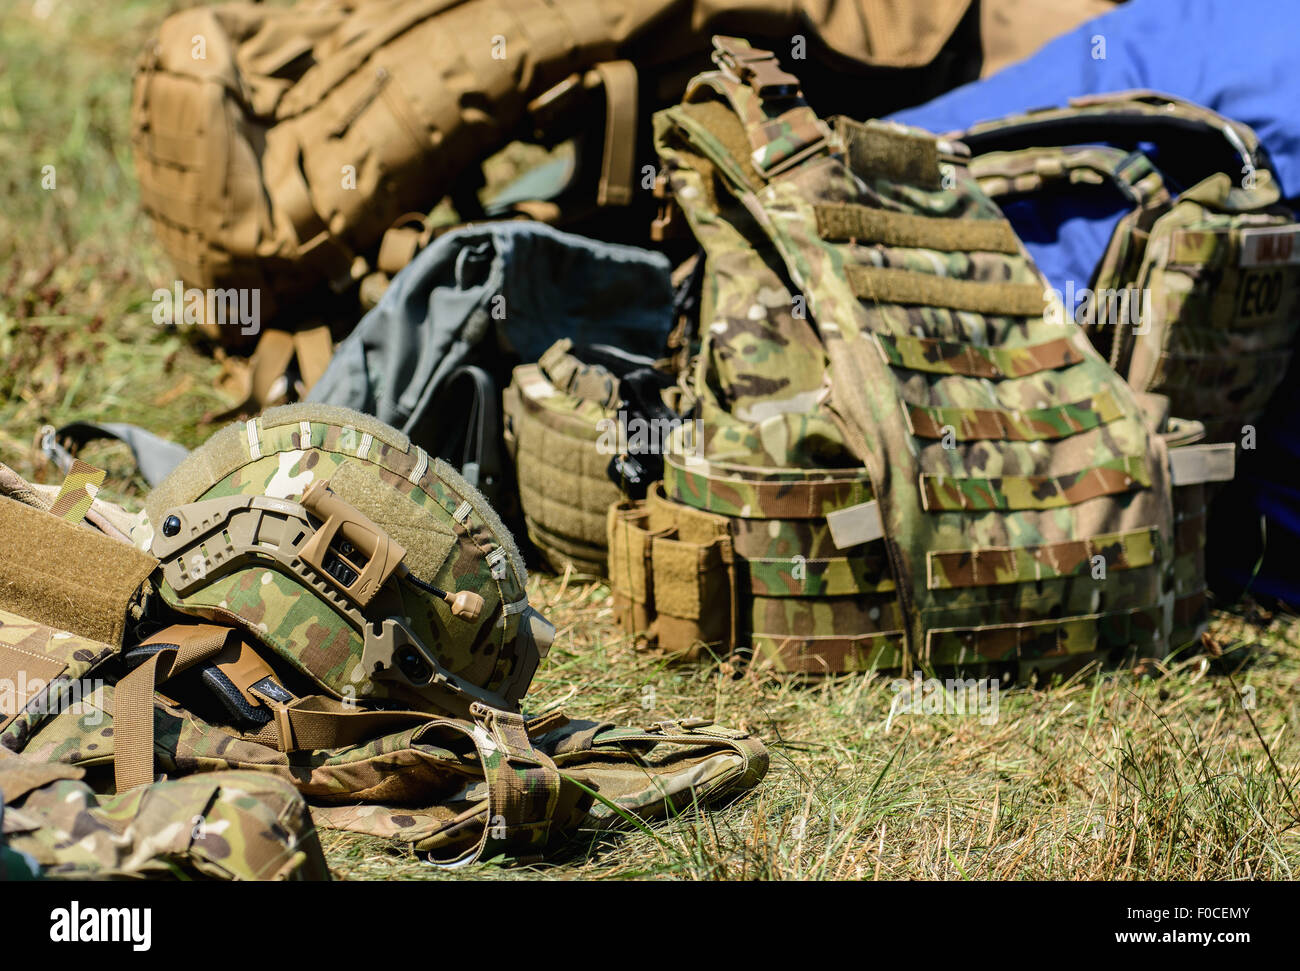 Engelmannsreuth, Germany. 12th Aug, 2015. Vests and helmets providing ballistic protection of the US armed forces lie on a field in the aftermath of a crashed plane near Engelmannsreuth, Germany, 12 August 2015. A US Air Force F-16 crashed near Engelmannsreuth, Germany, on 11 August 2015. Rescue operations are still taking place. Photo: NICOLAS ARMER/dpa/Alamy Live News Stock Photo